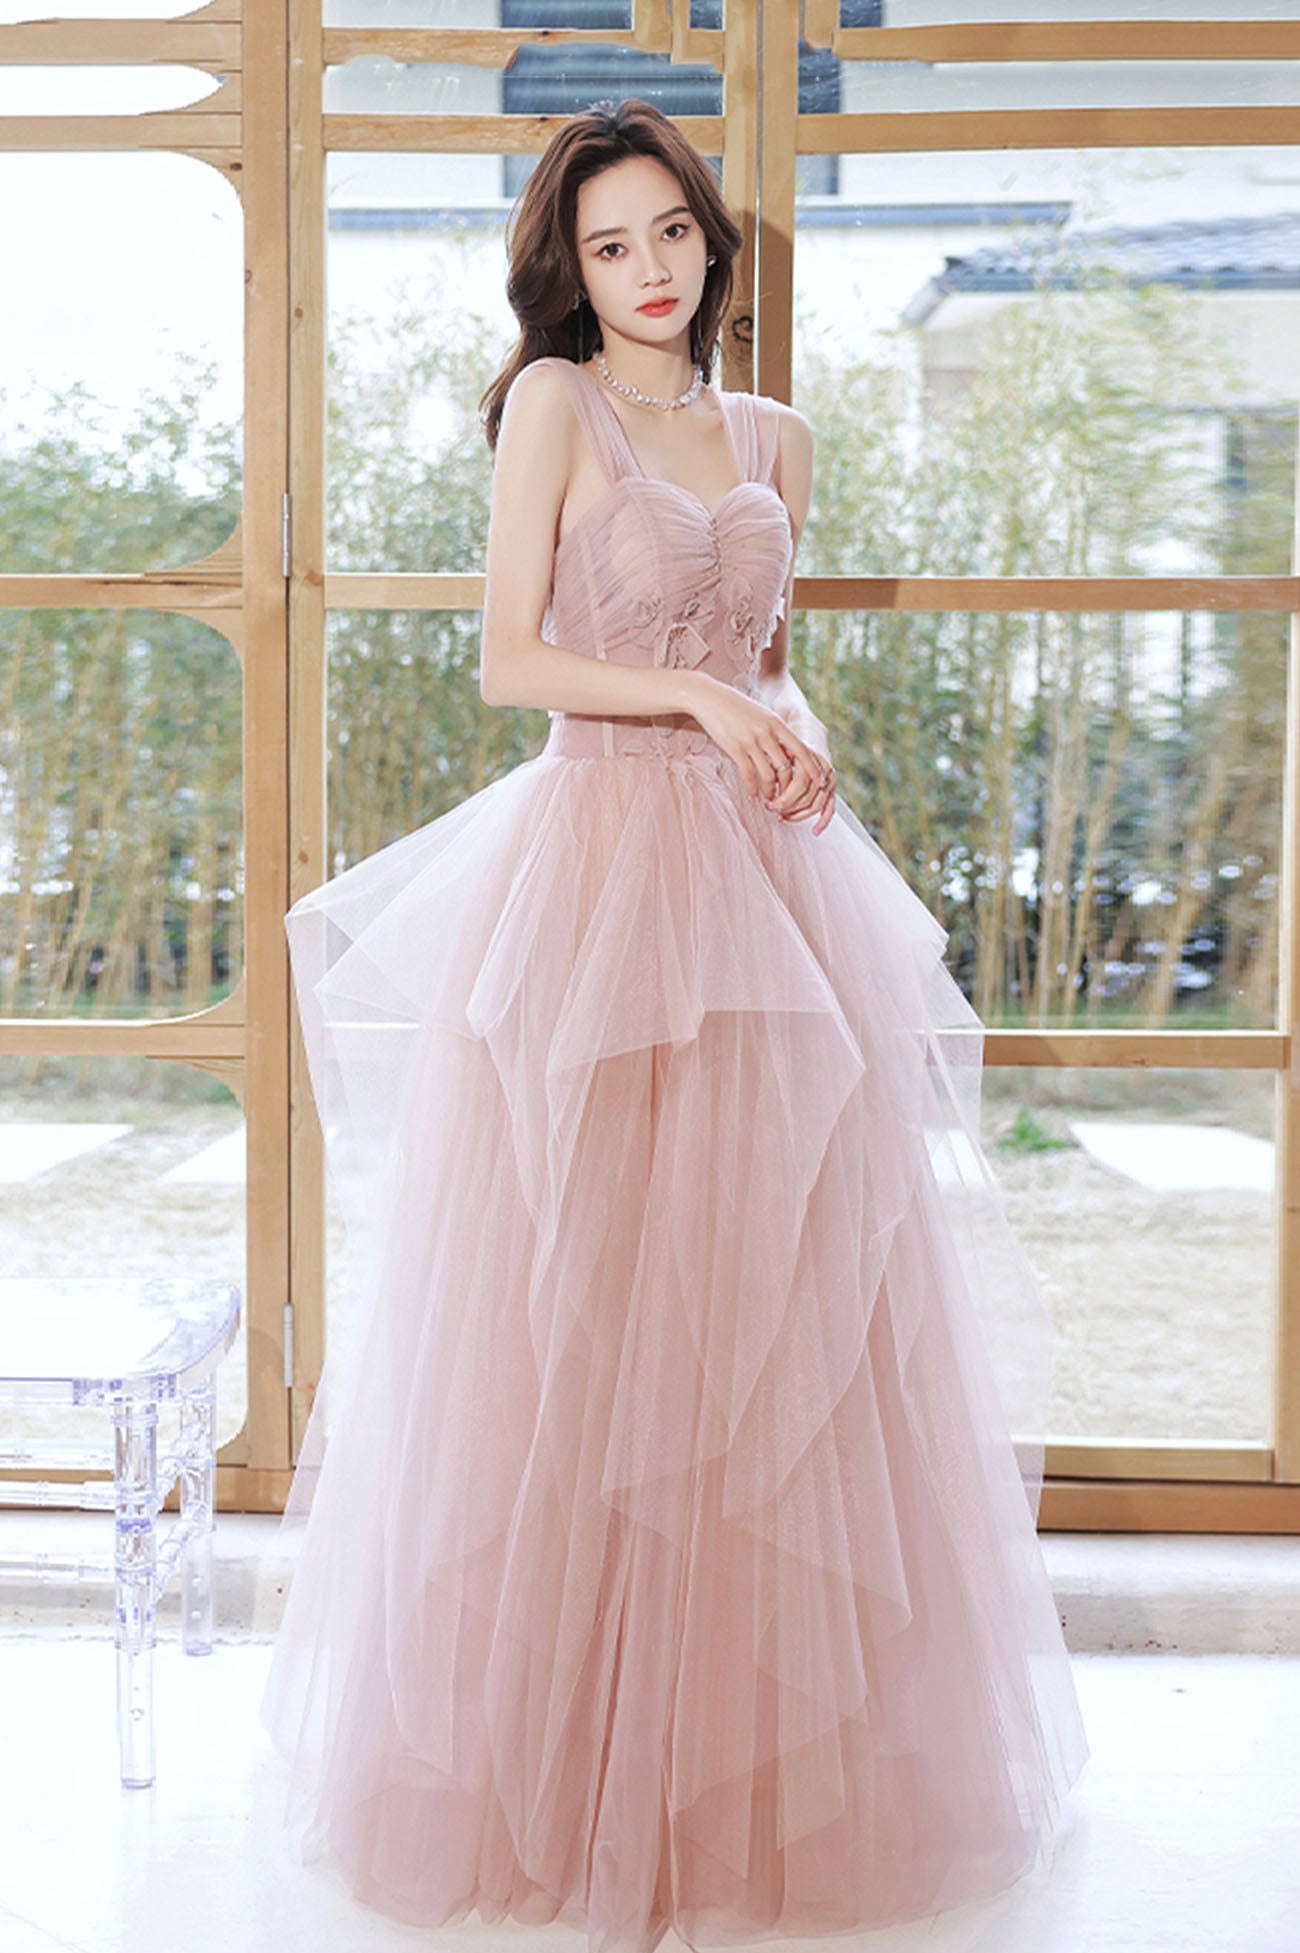 Pink Tulle Layers Floor Length Prom Dress, Cute Strapless Evening Party Dress